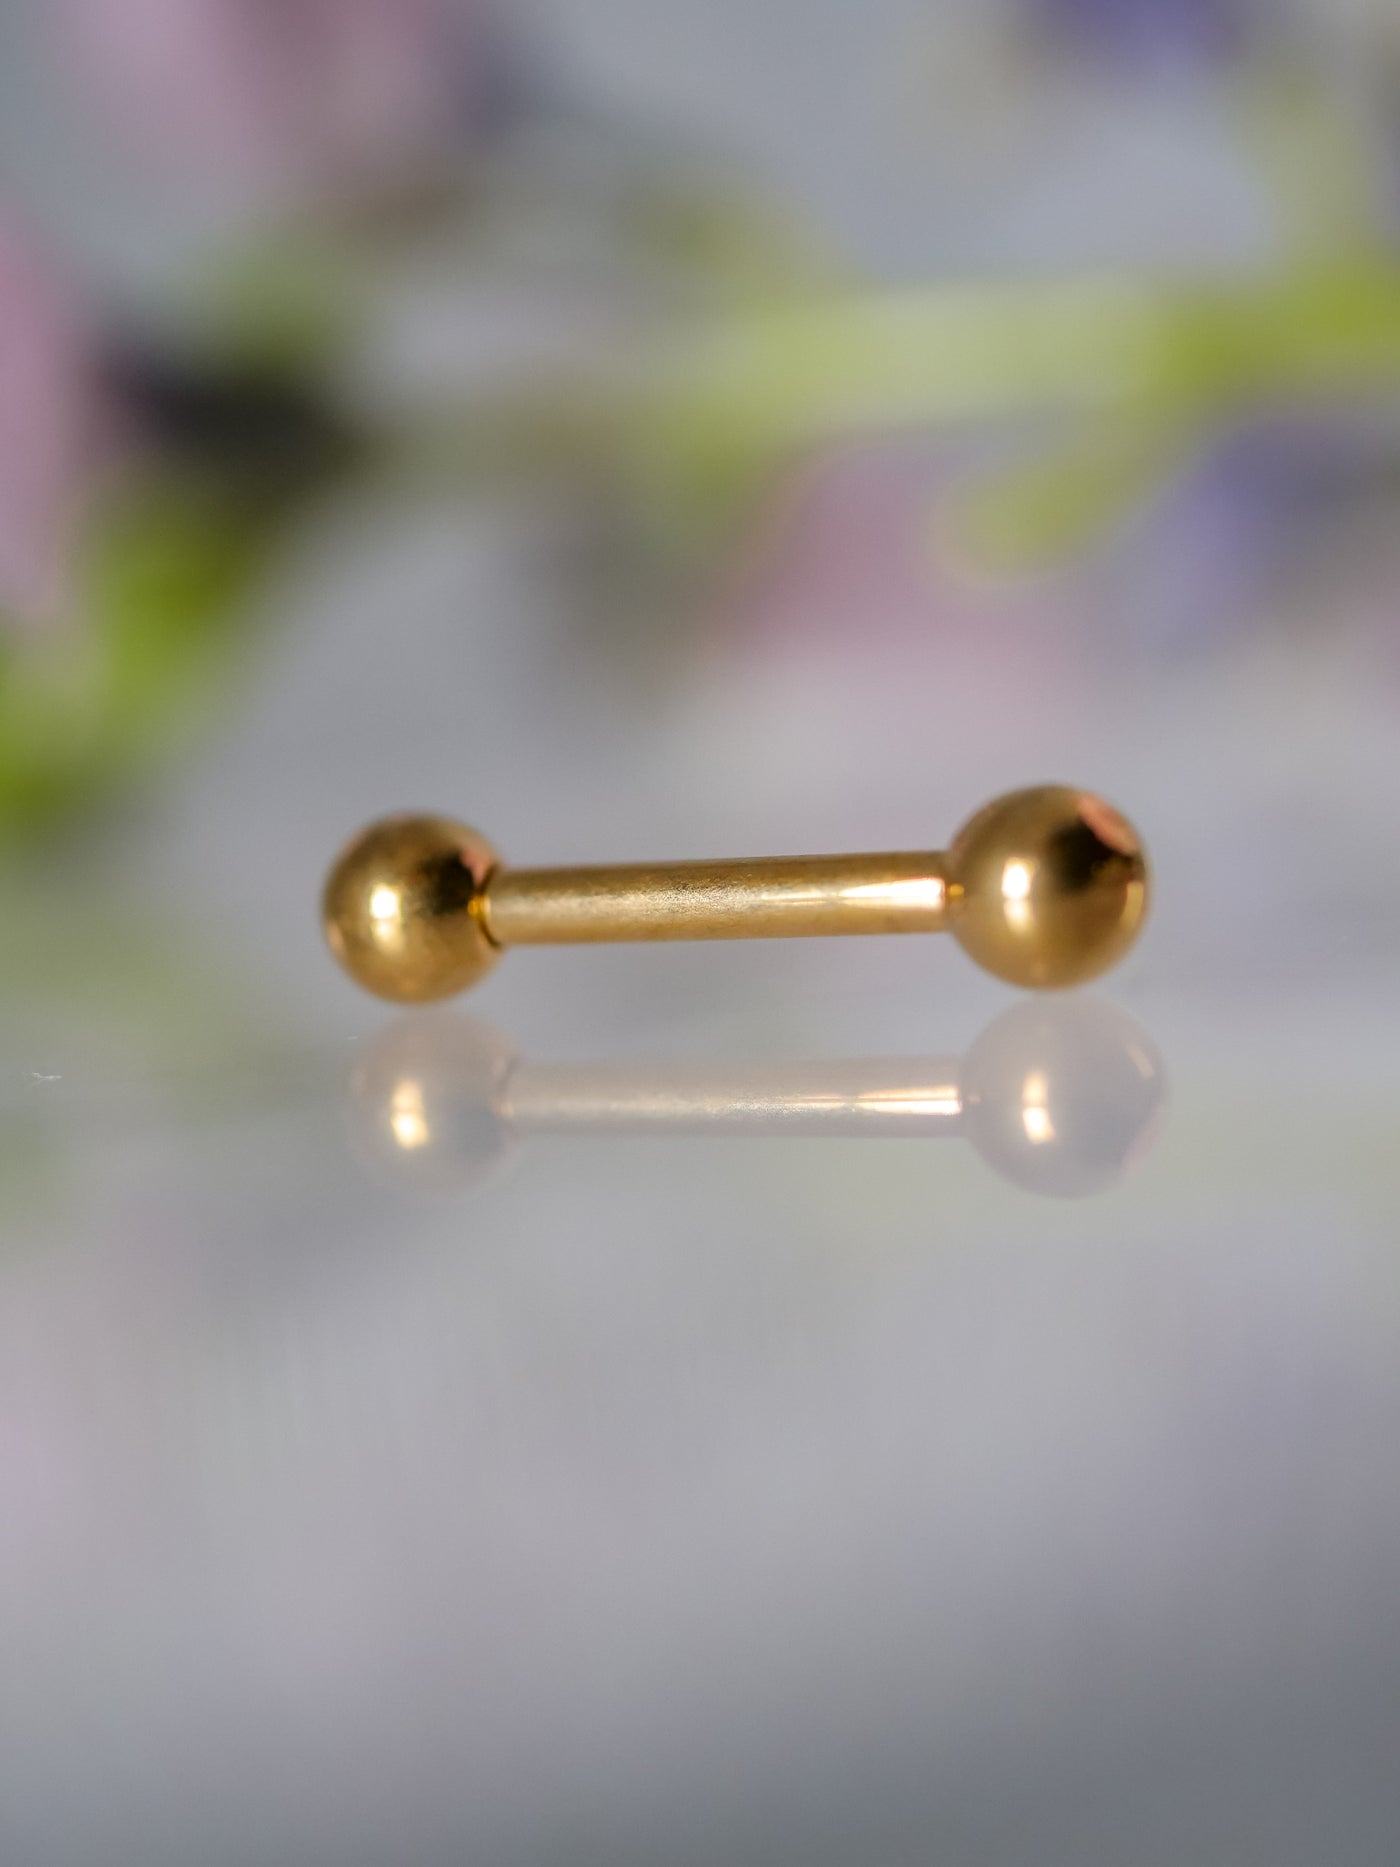 24Kt Gold PVD Internally Threaded Barbells by Invictus Body Jewelry